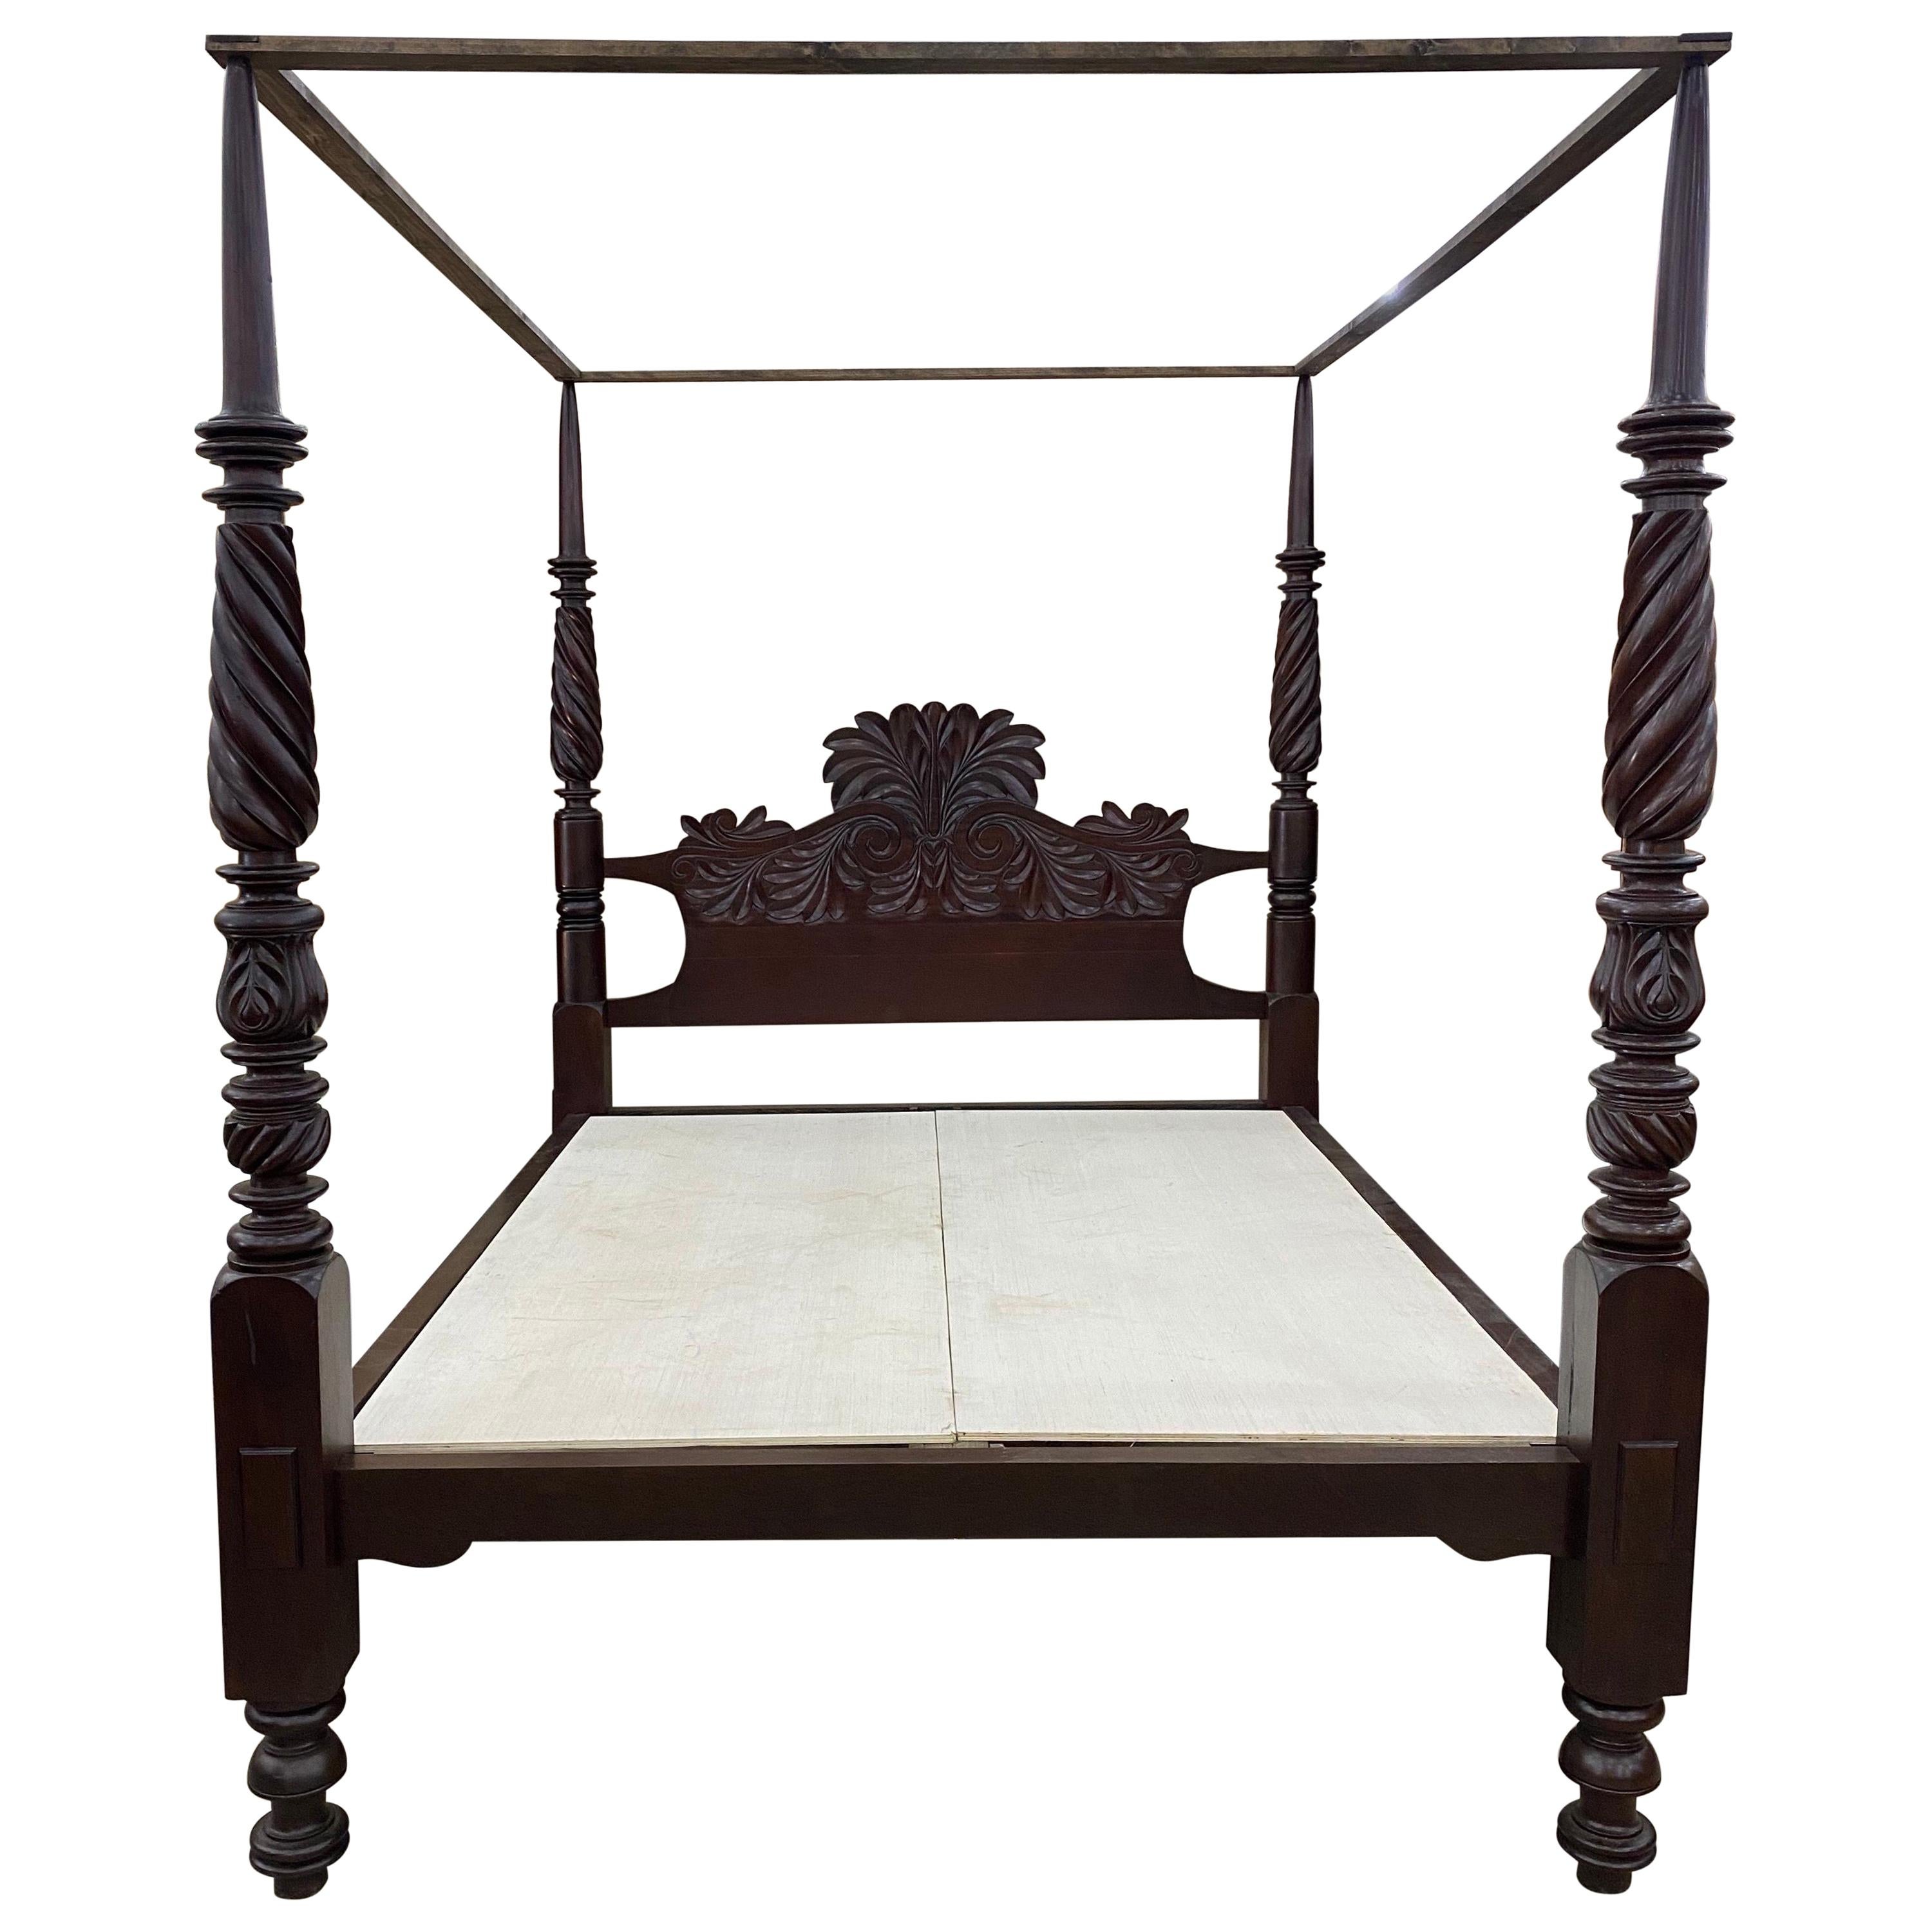 19th Century British West Indies 4 Post Bed from Jamaica 'California King'